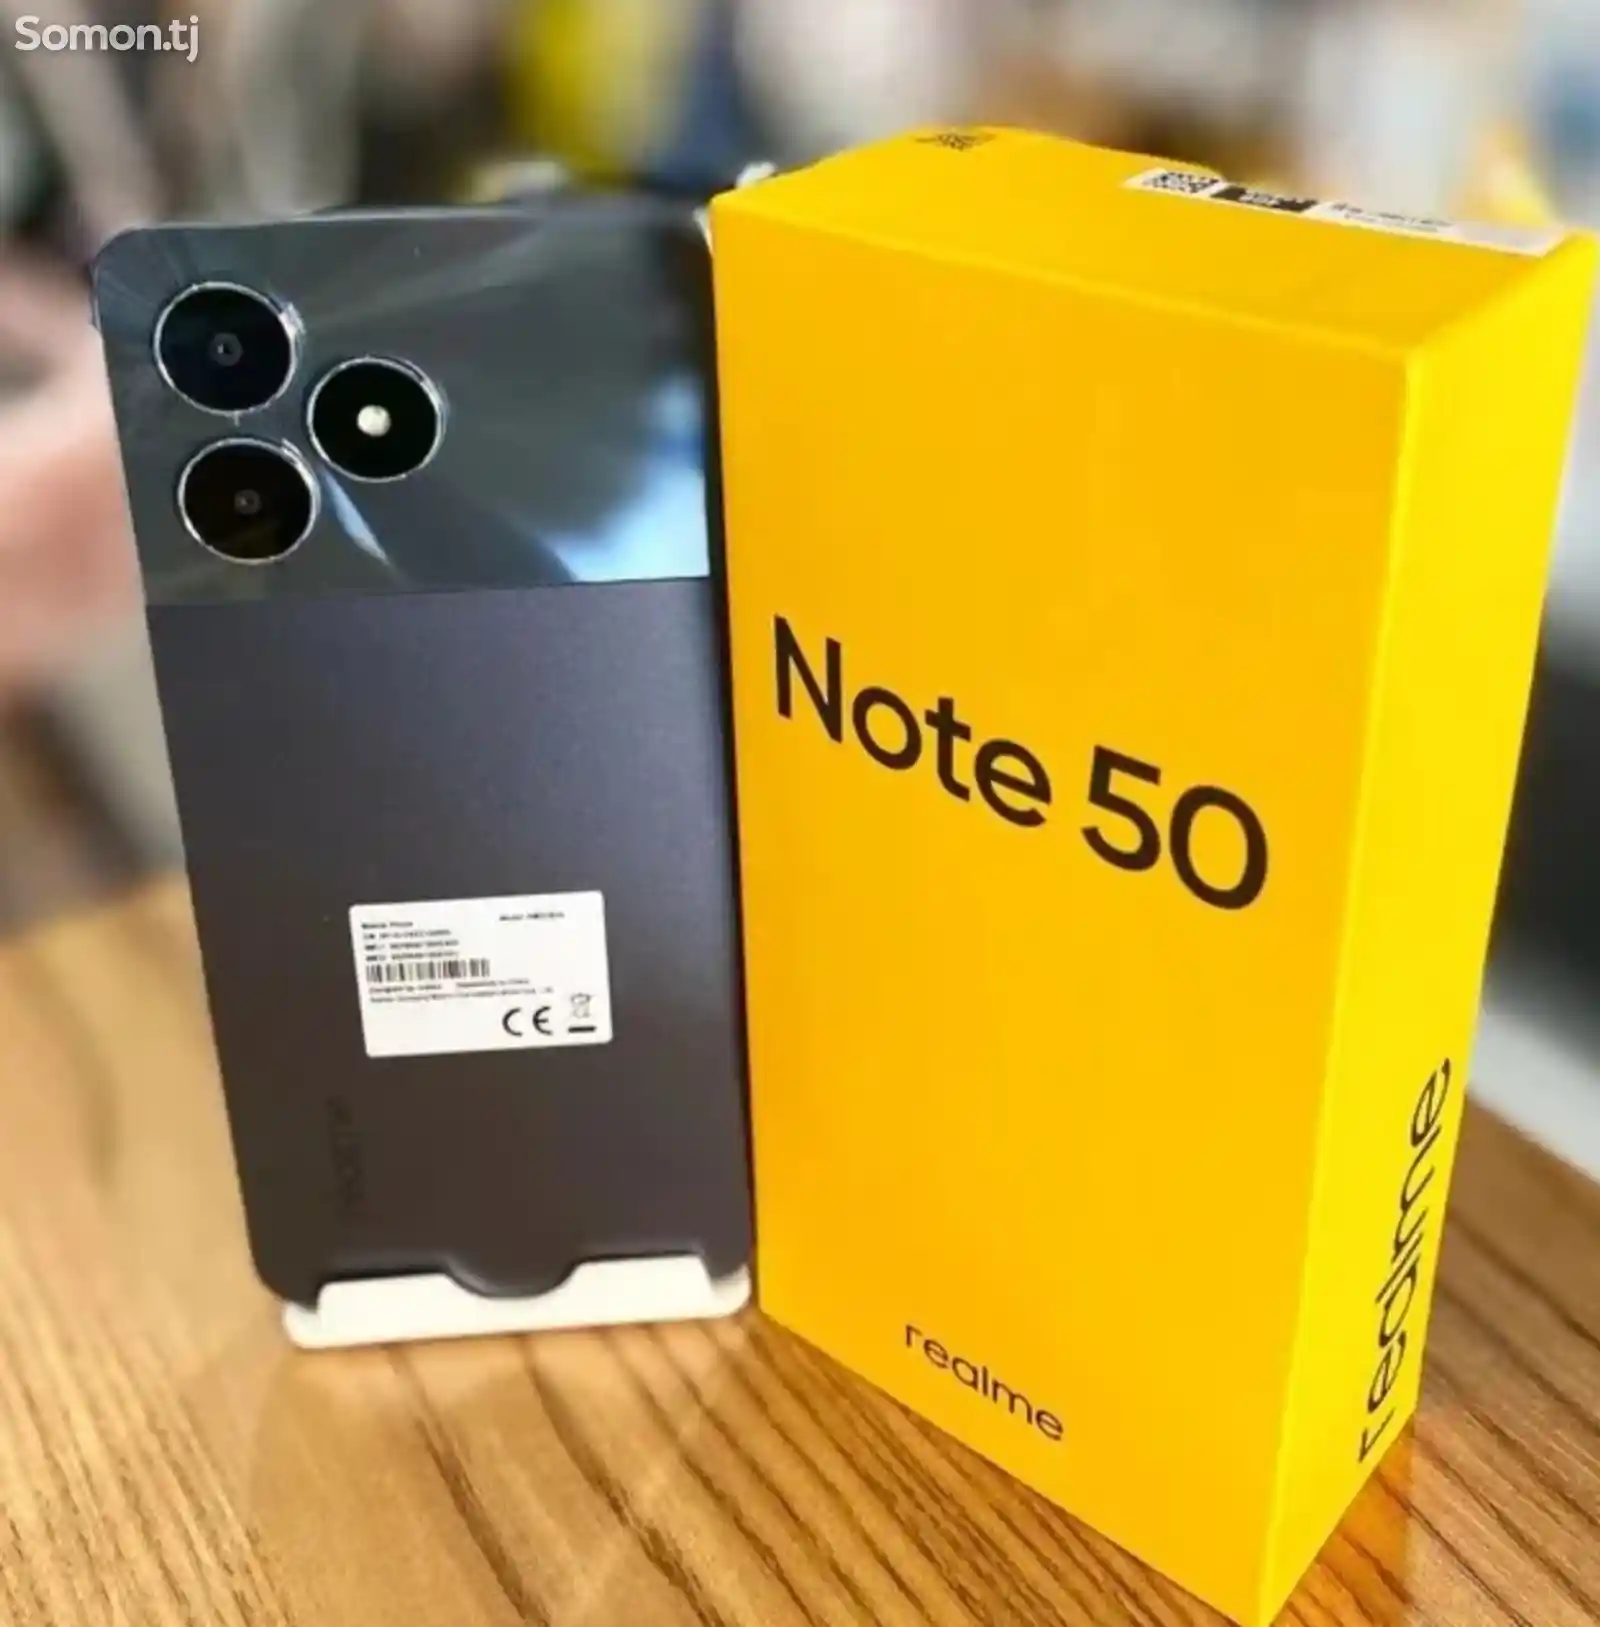 Realmе Note 50 128Gb-4